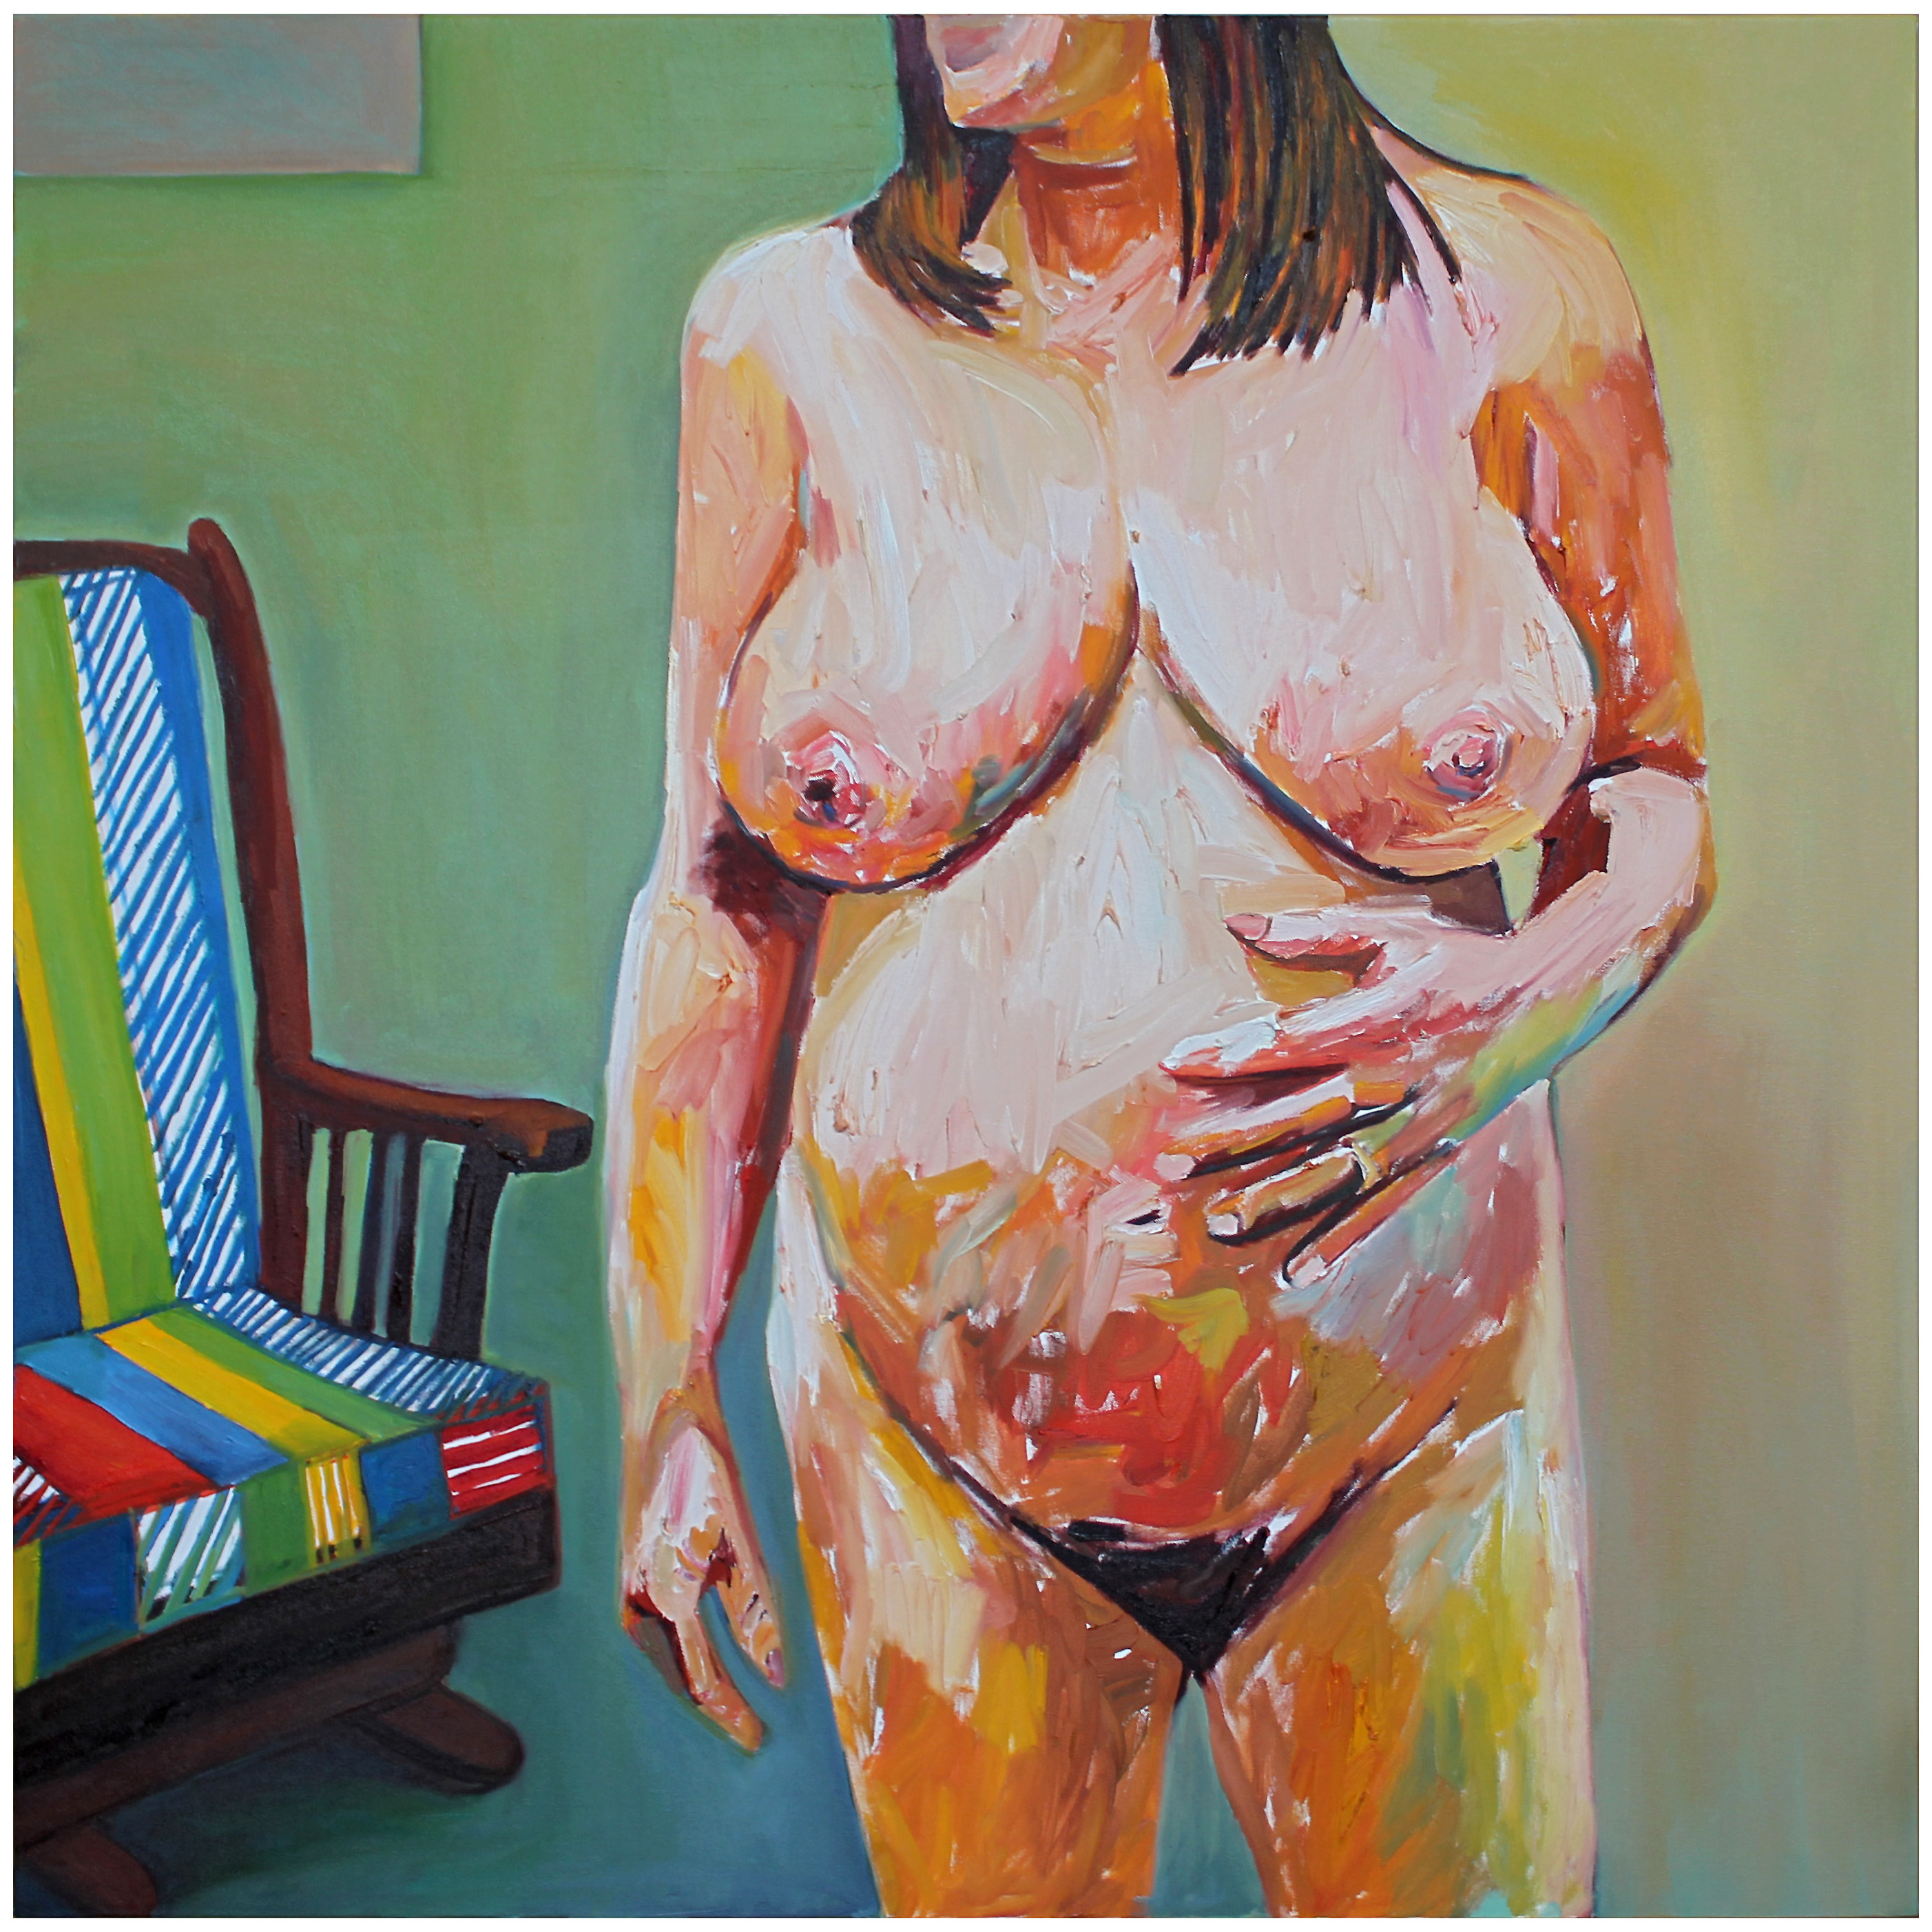 Beverly McIver, Annah Pregnant, 2013. Image courtesy of Betty Cunningham Gallery